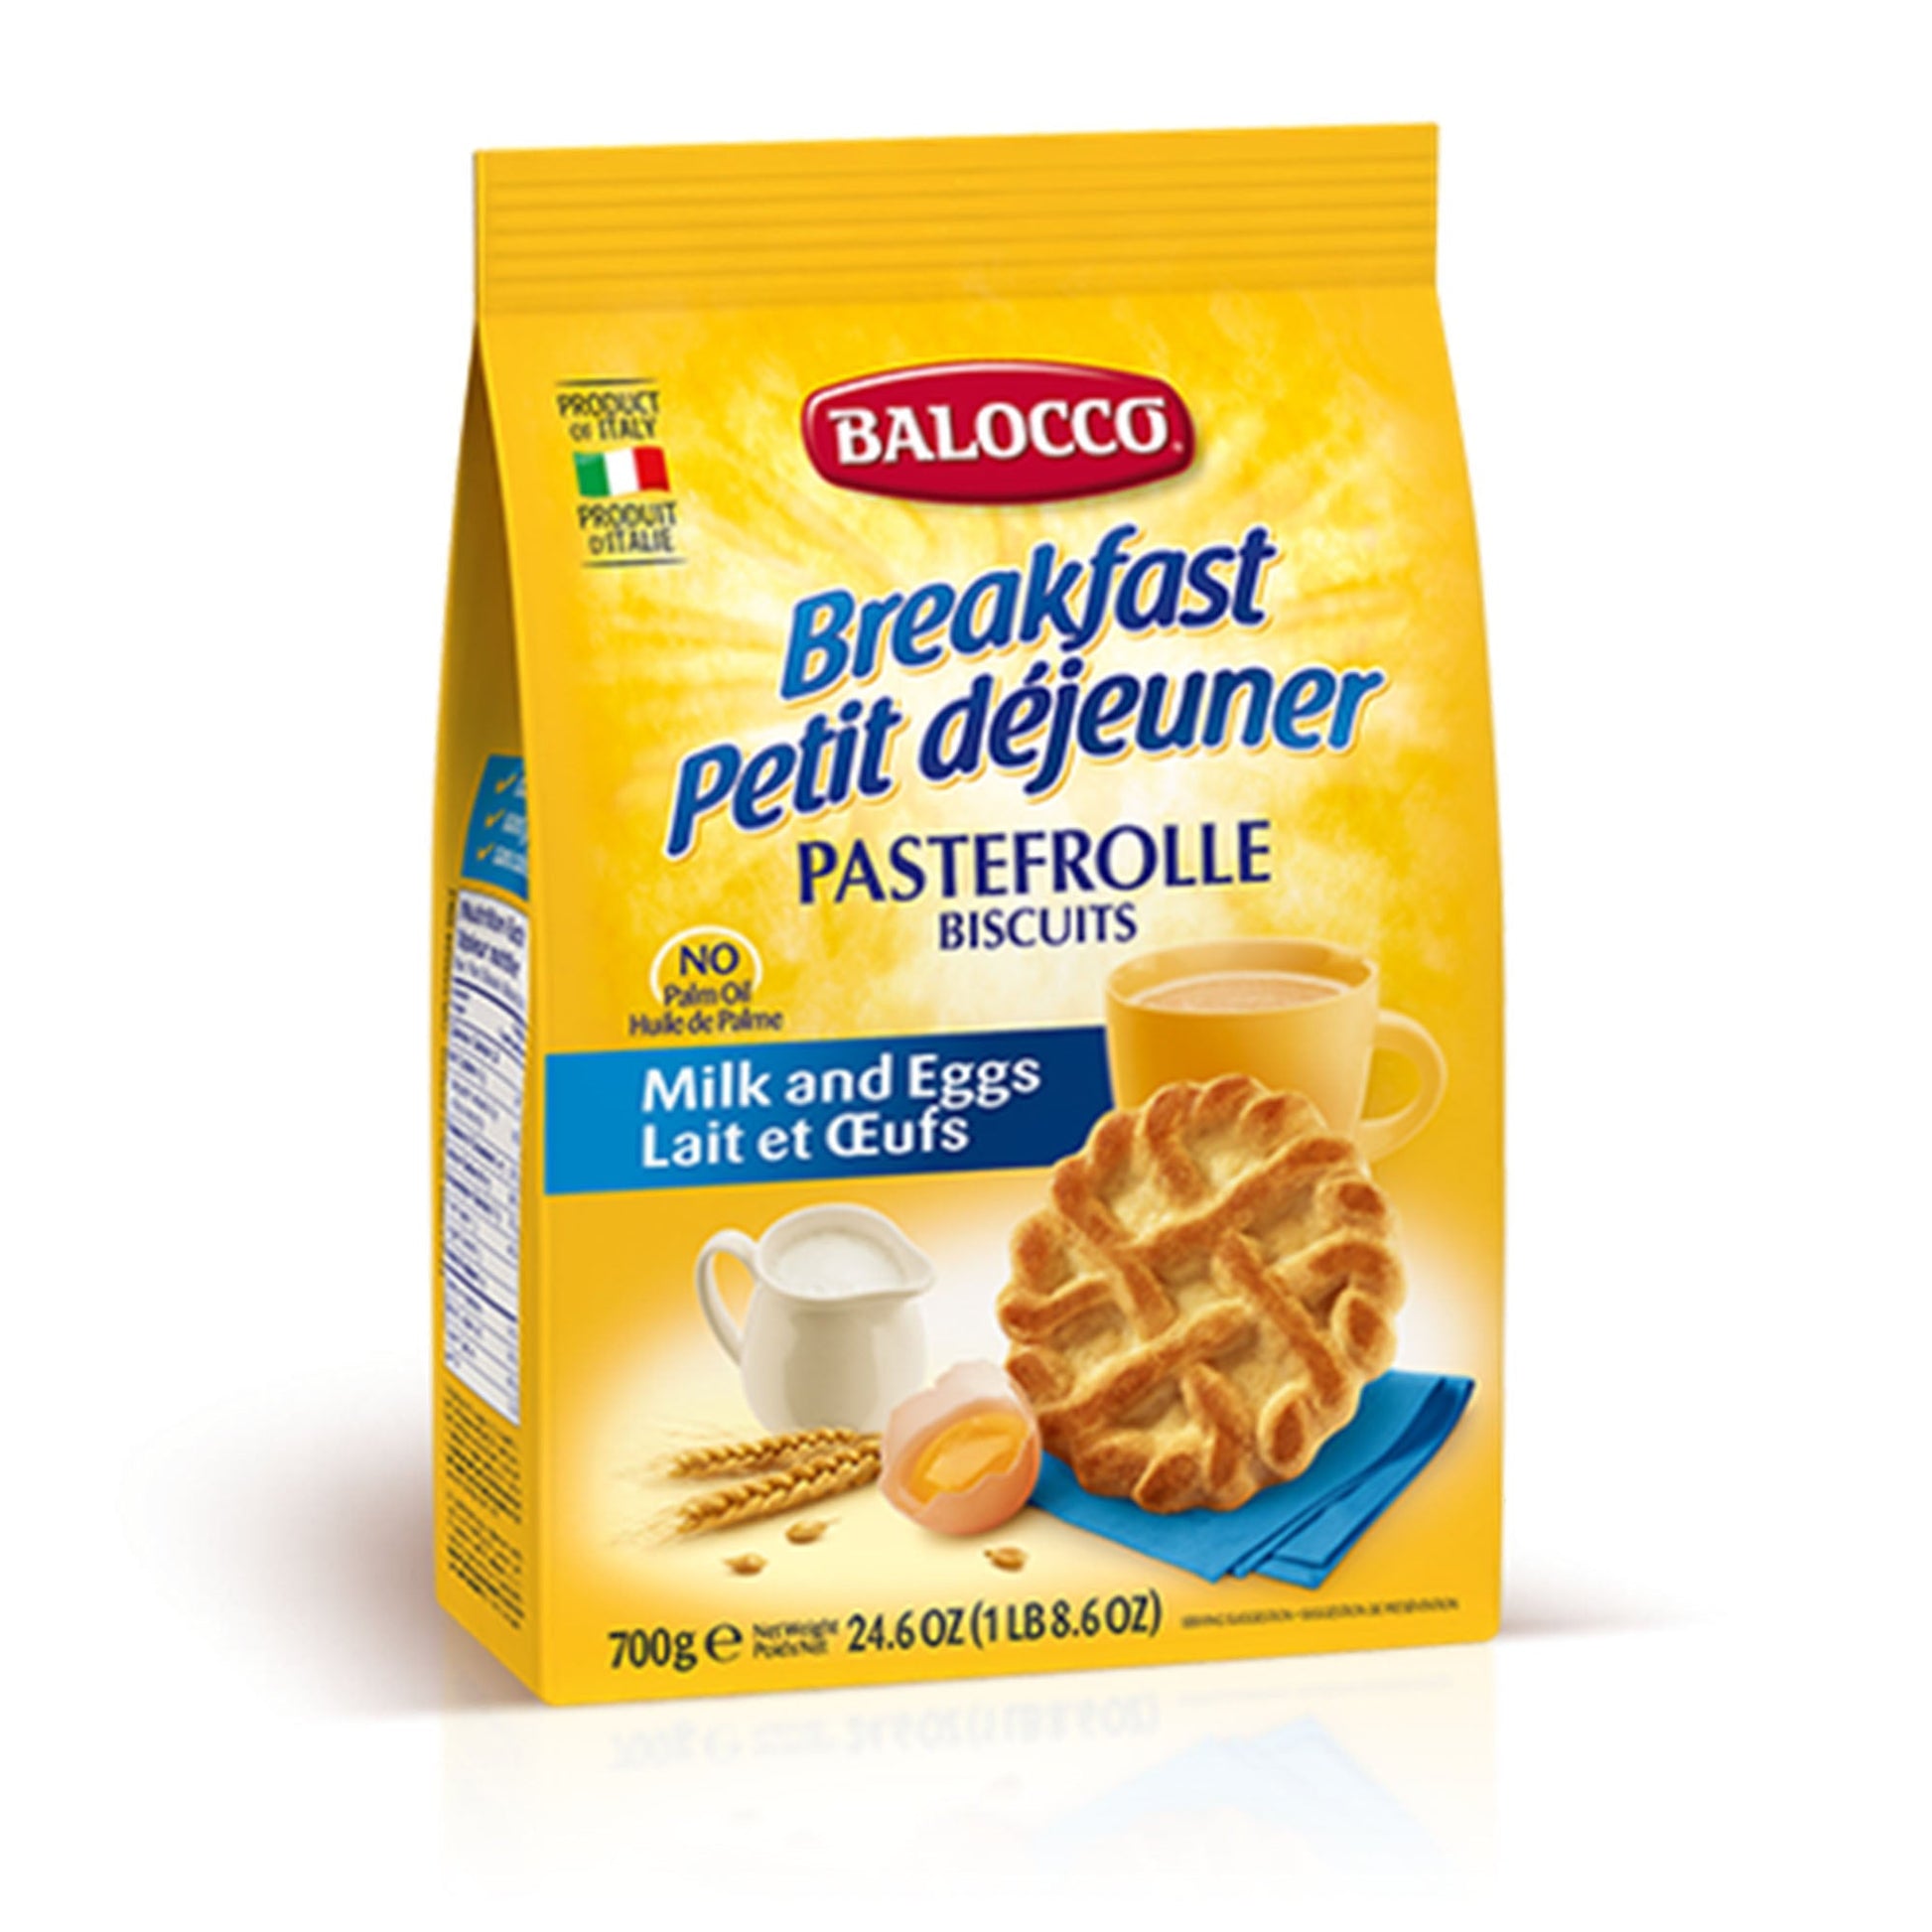 Balocco Pastefrolle Bisc 700G